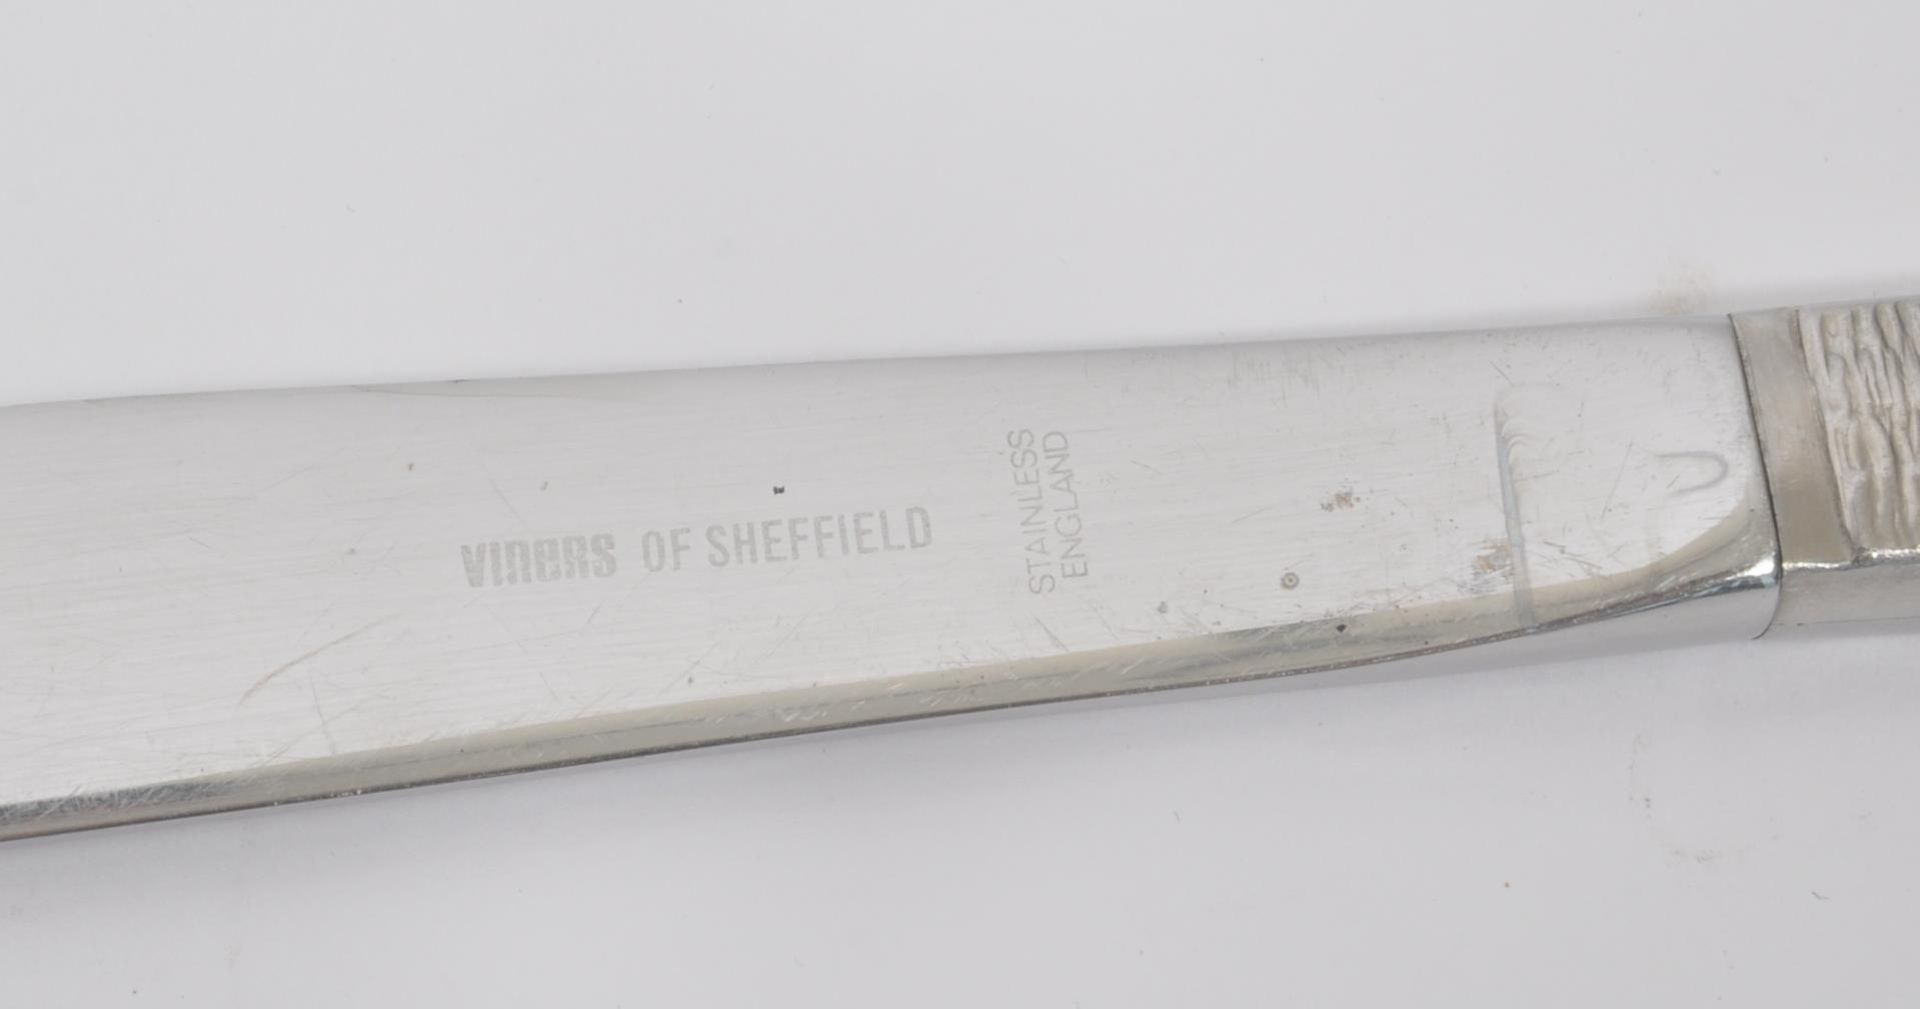 COLLECTION OF VINERS OF SHEFFIELD BARK EFFECT CUTLERY - Image 6 of 6